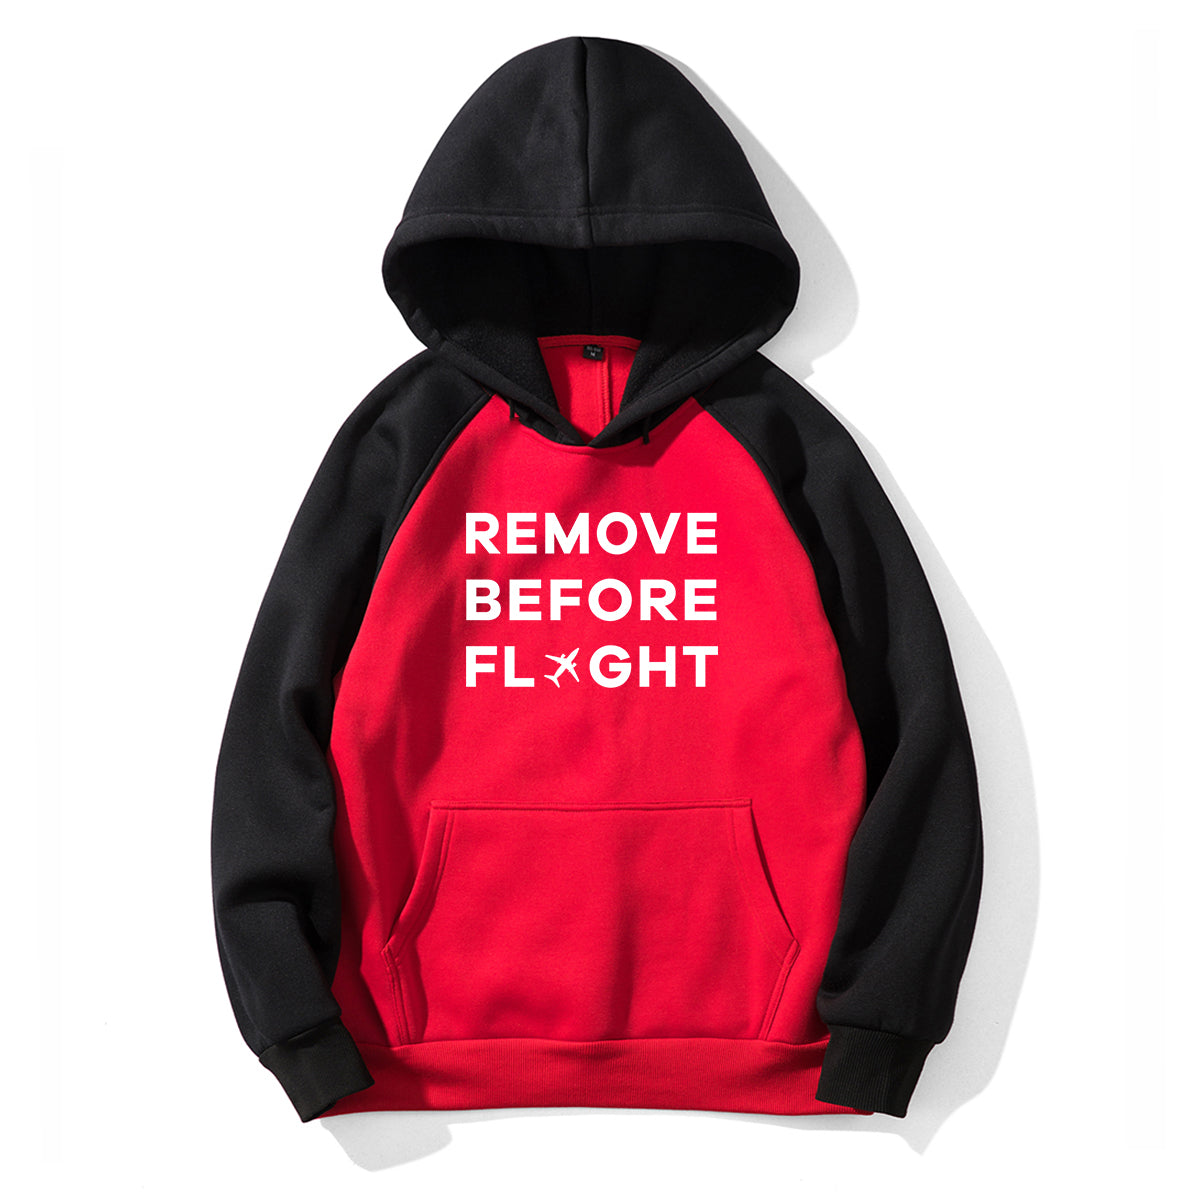 Remove Before Flight Designed Colourful Hoodies